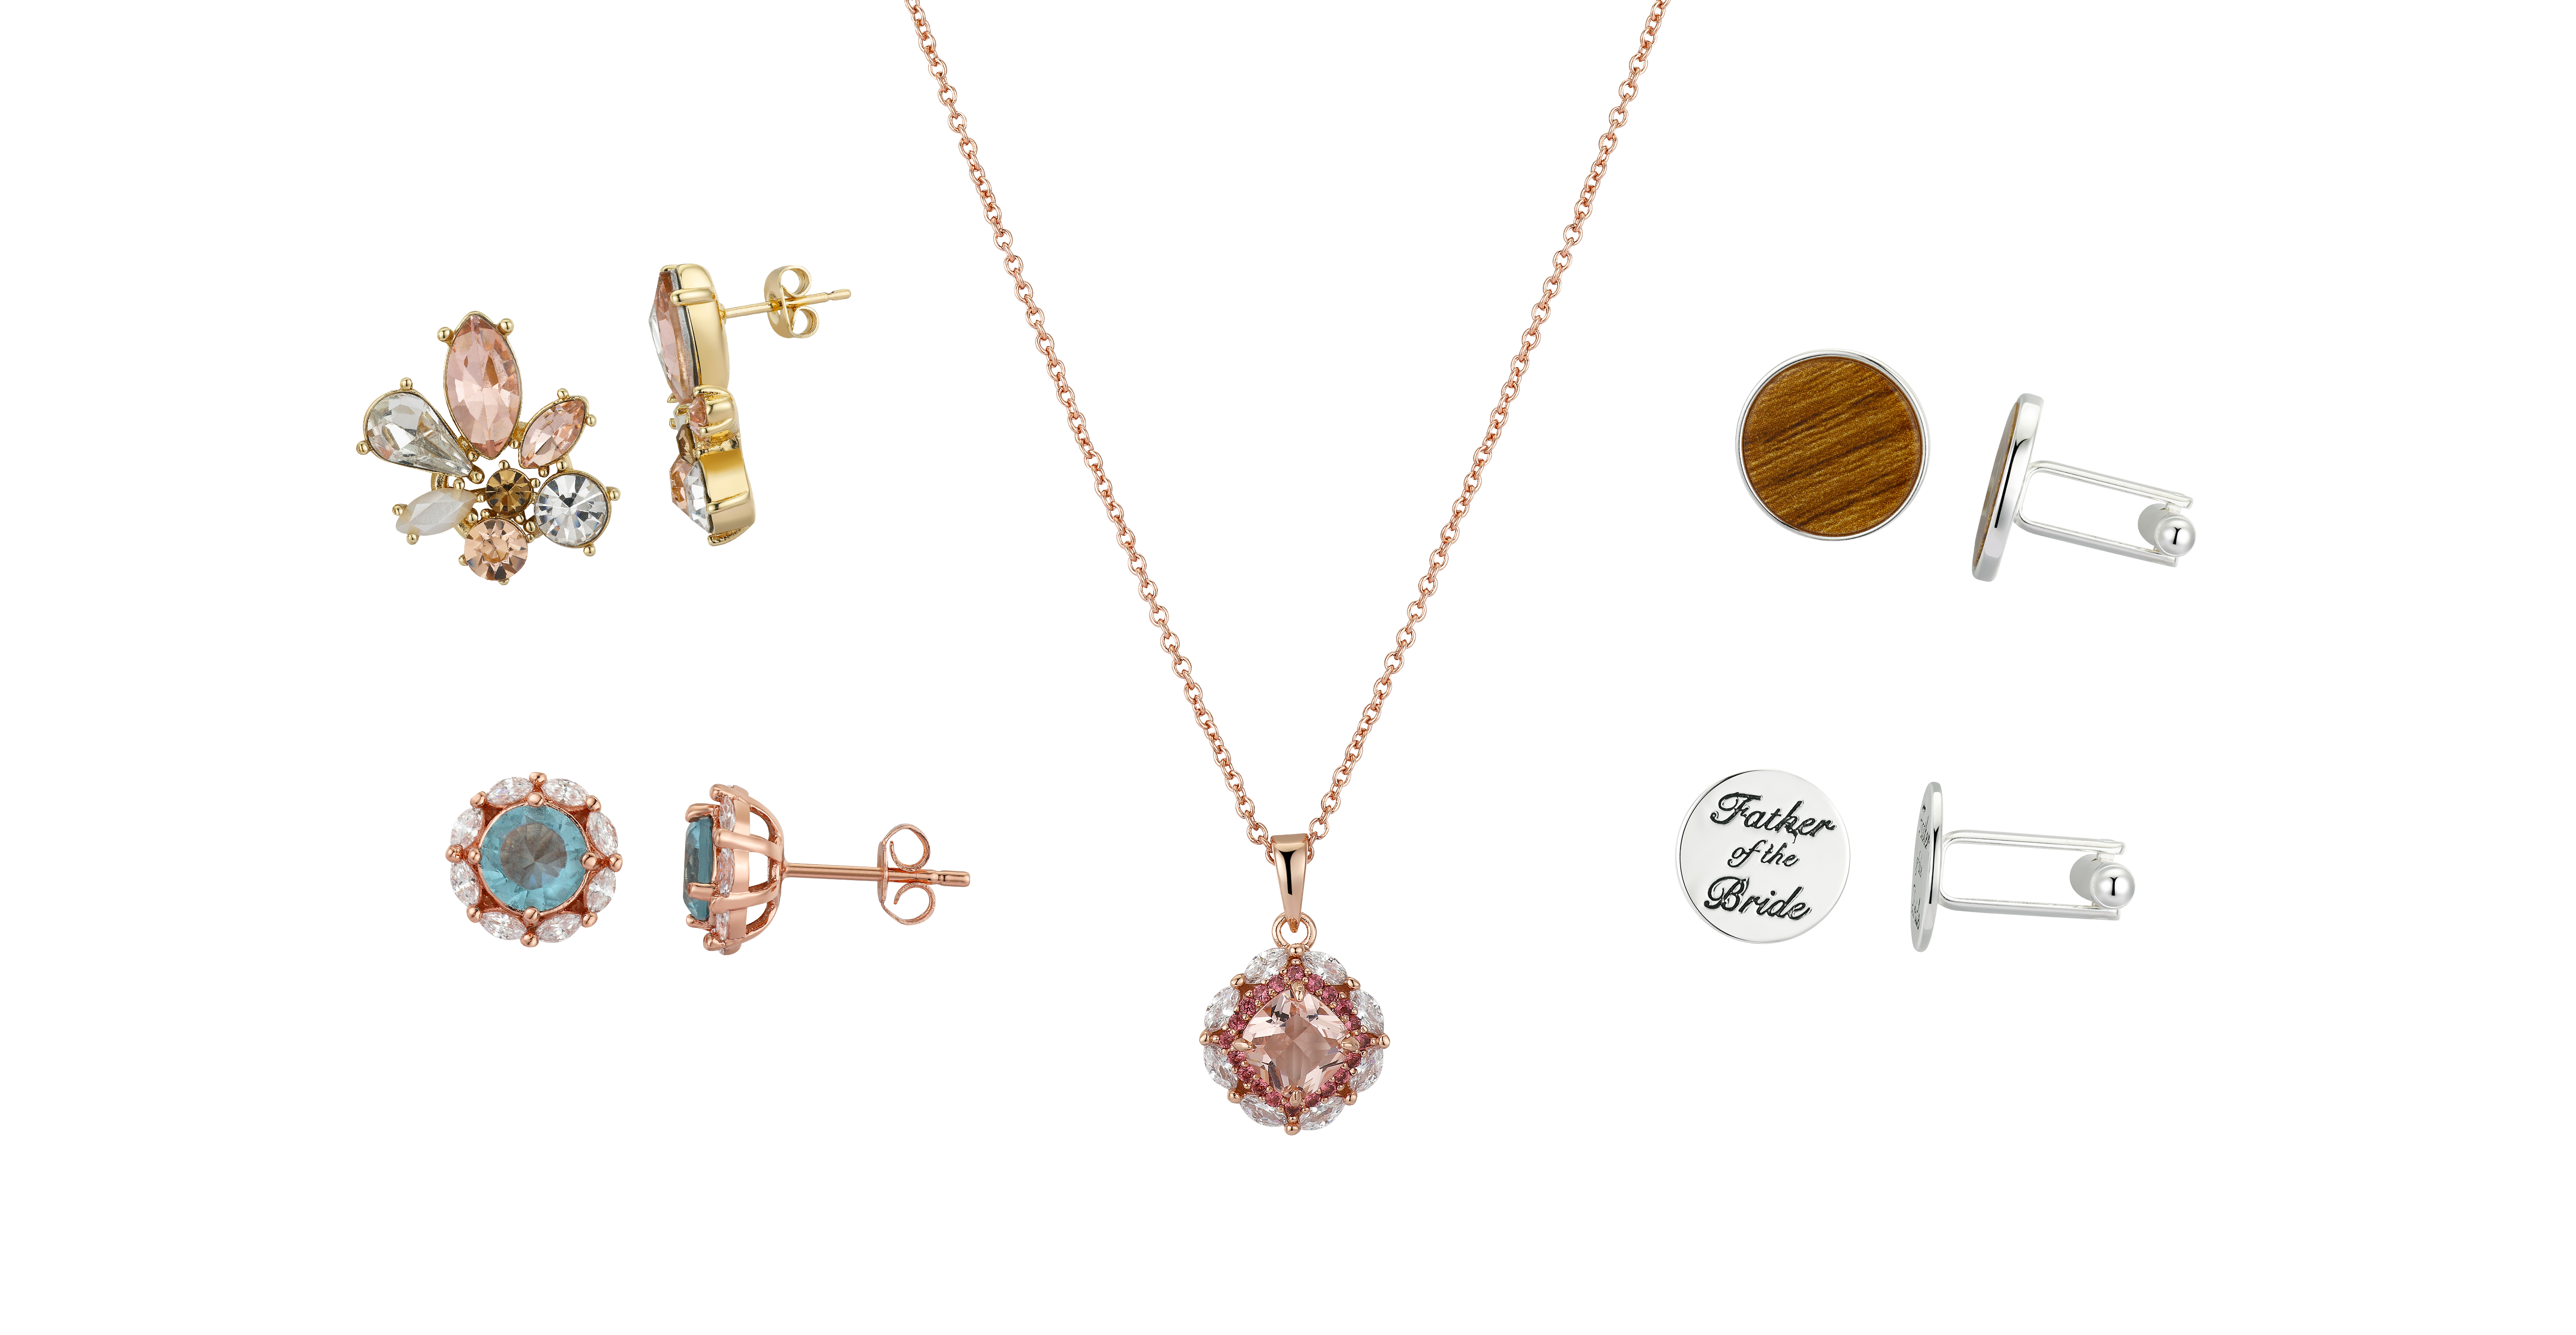 Collage of jewelry from David Tutera includes gorgeous pendant, cufflinks, and earrings.